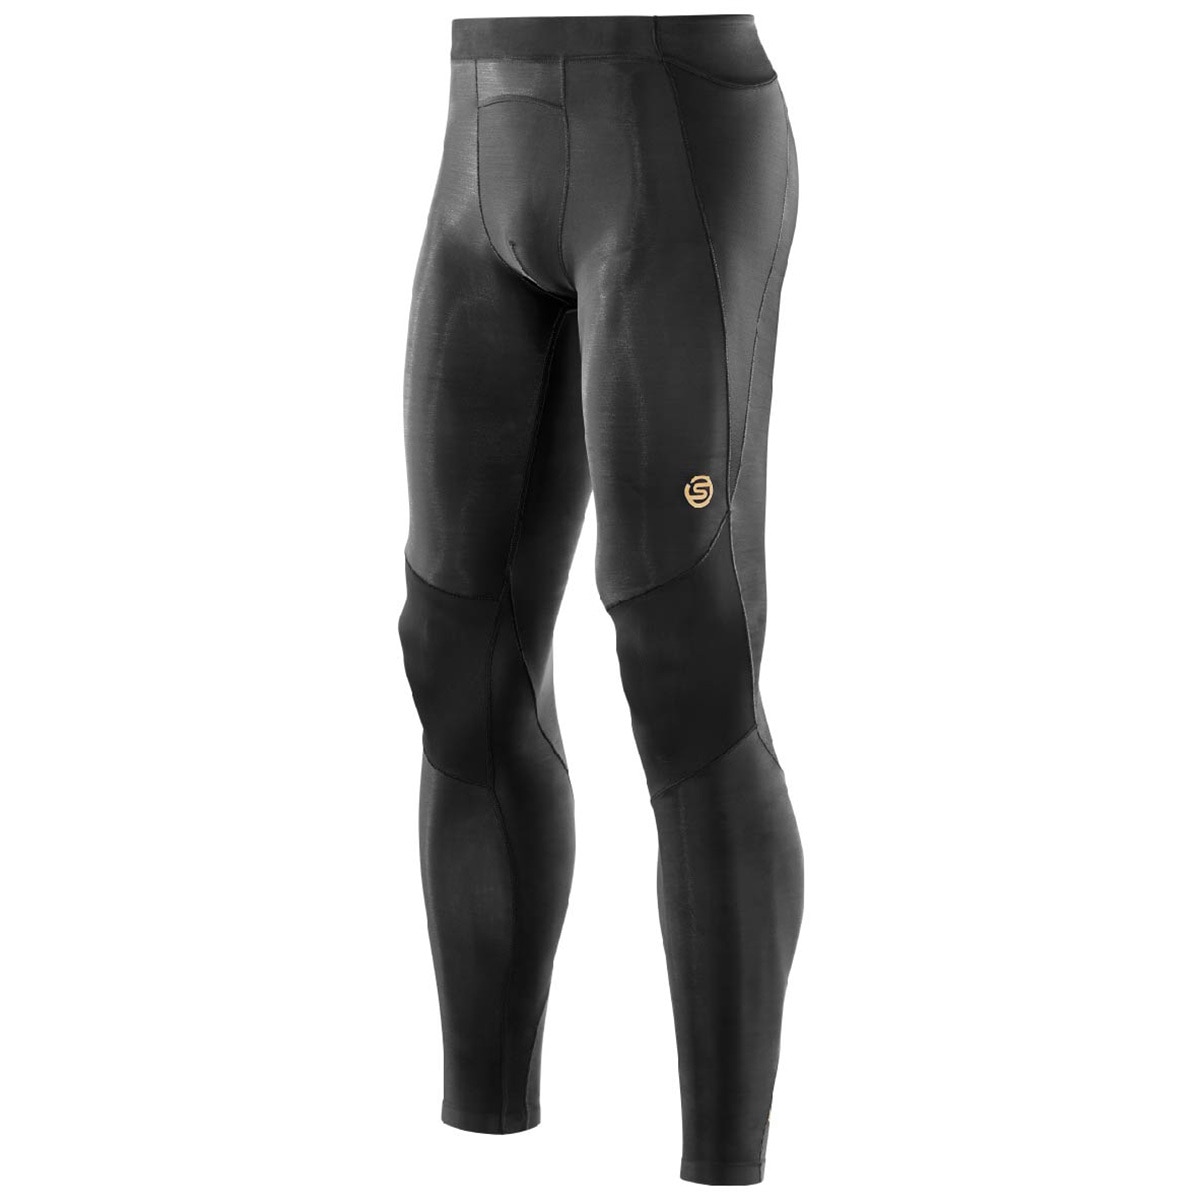 SKINS A400 WOMENS COMPRESSION LONG TIGHTS (NEXUS) | GREAT BARGAIN